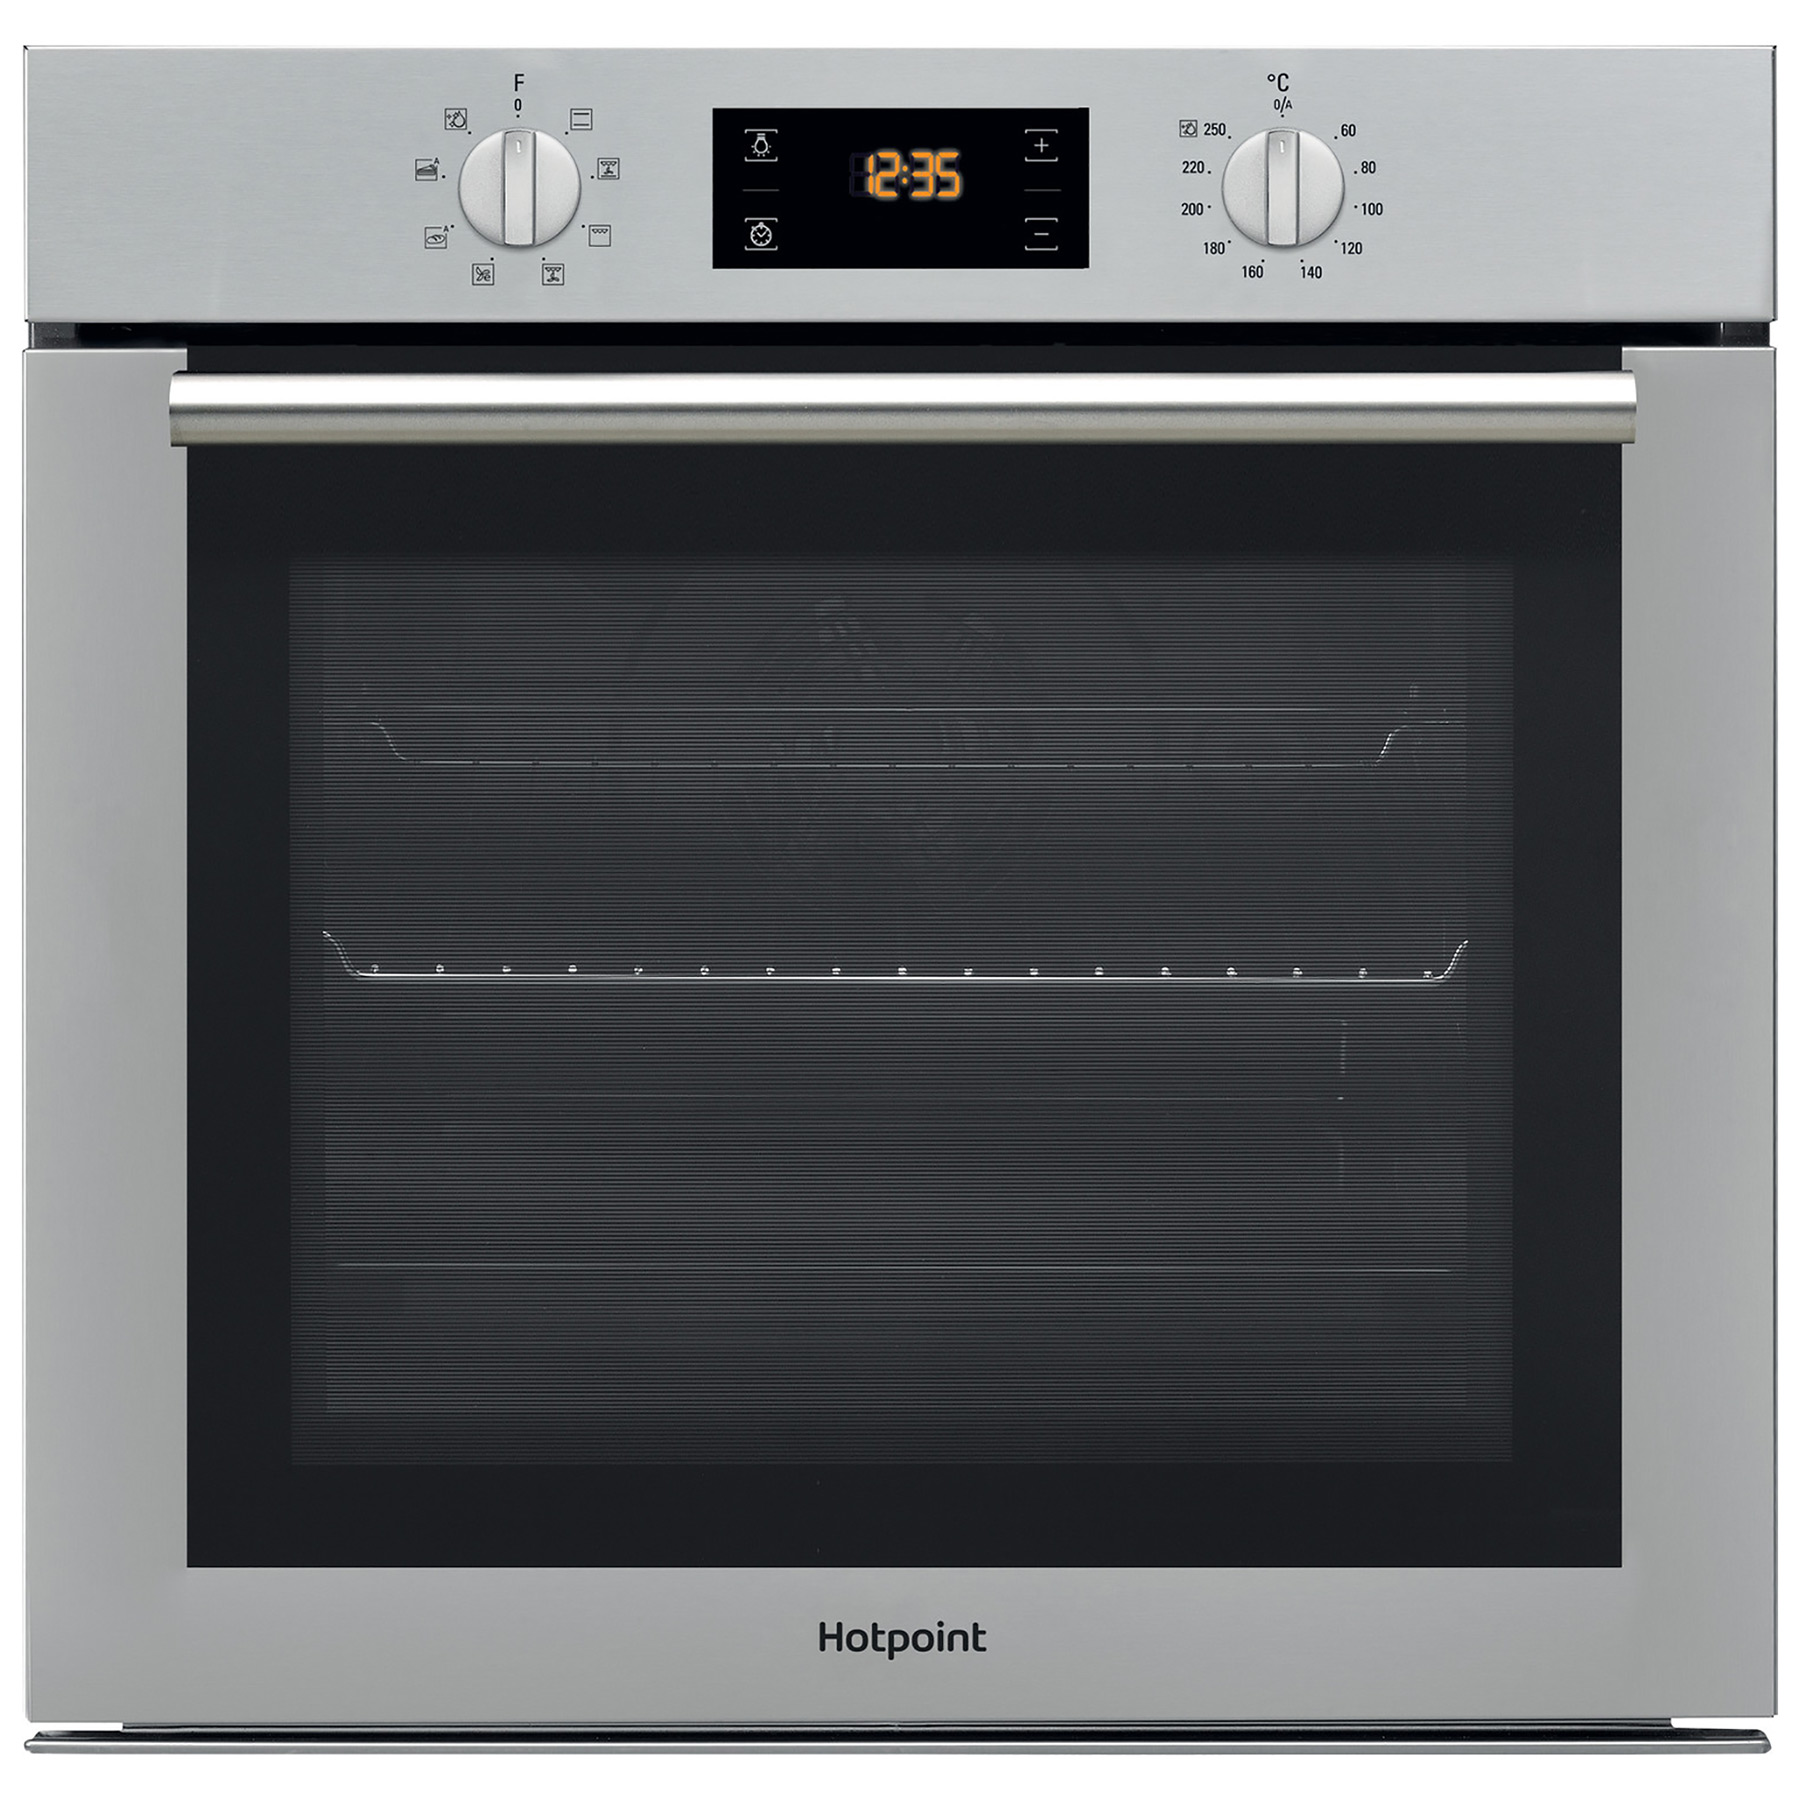 Hotpoint SA4544HIX Built In Electric Single Oven in St Steel 71L